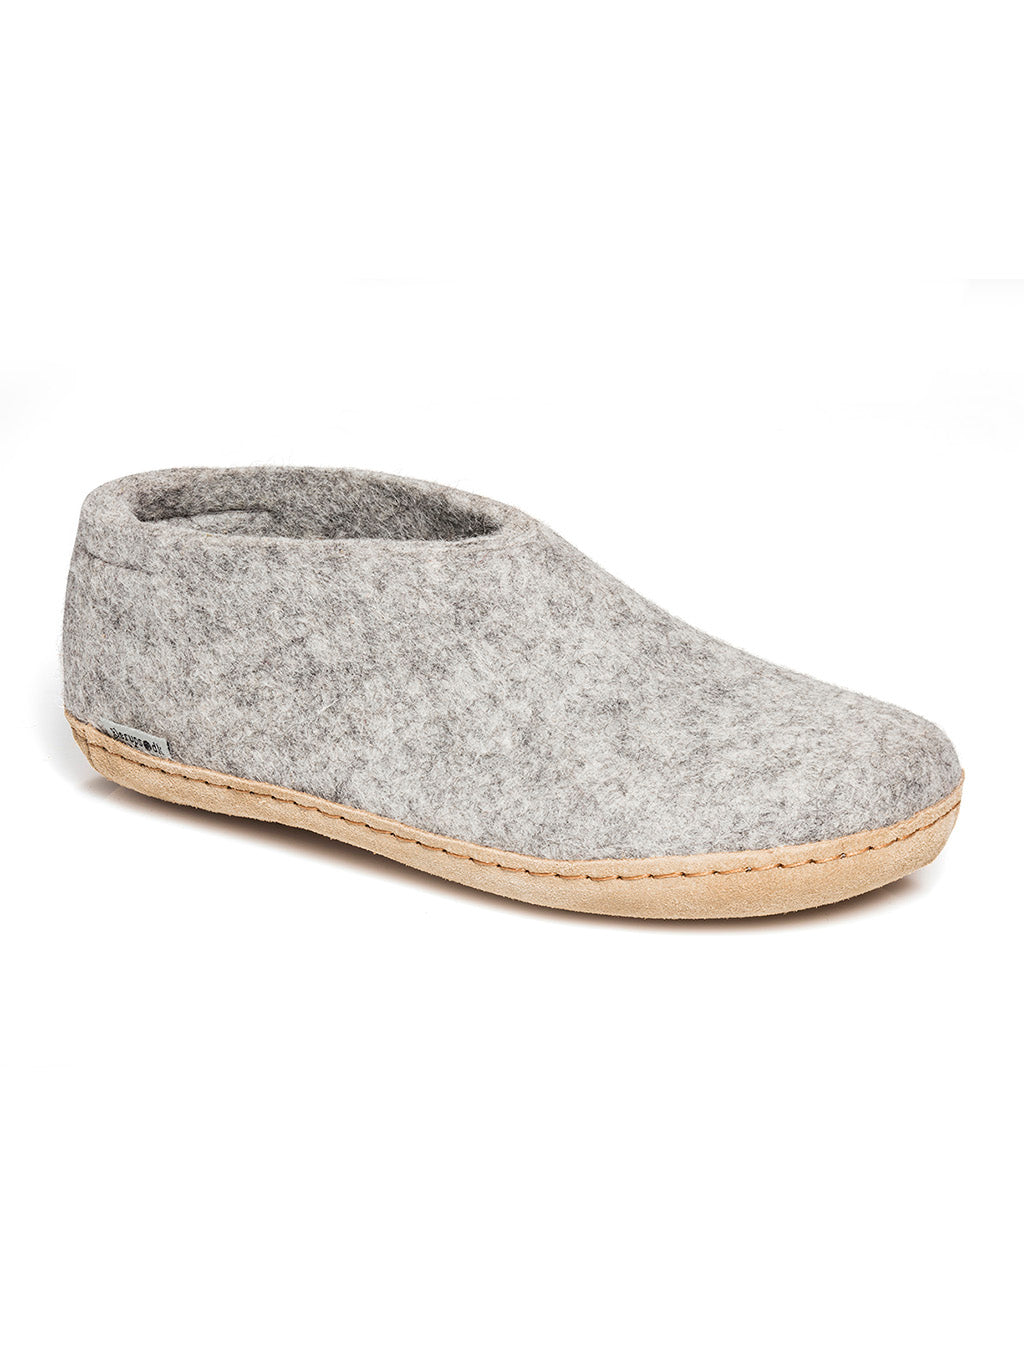 Grey wool shoe with leather sole